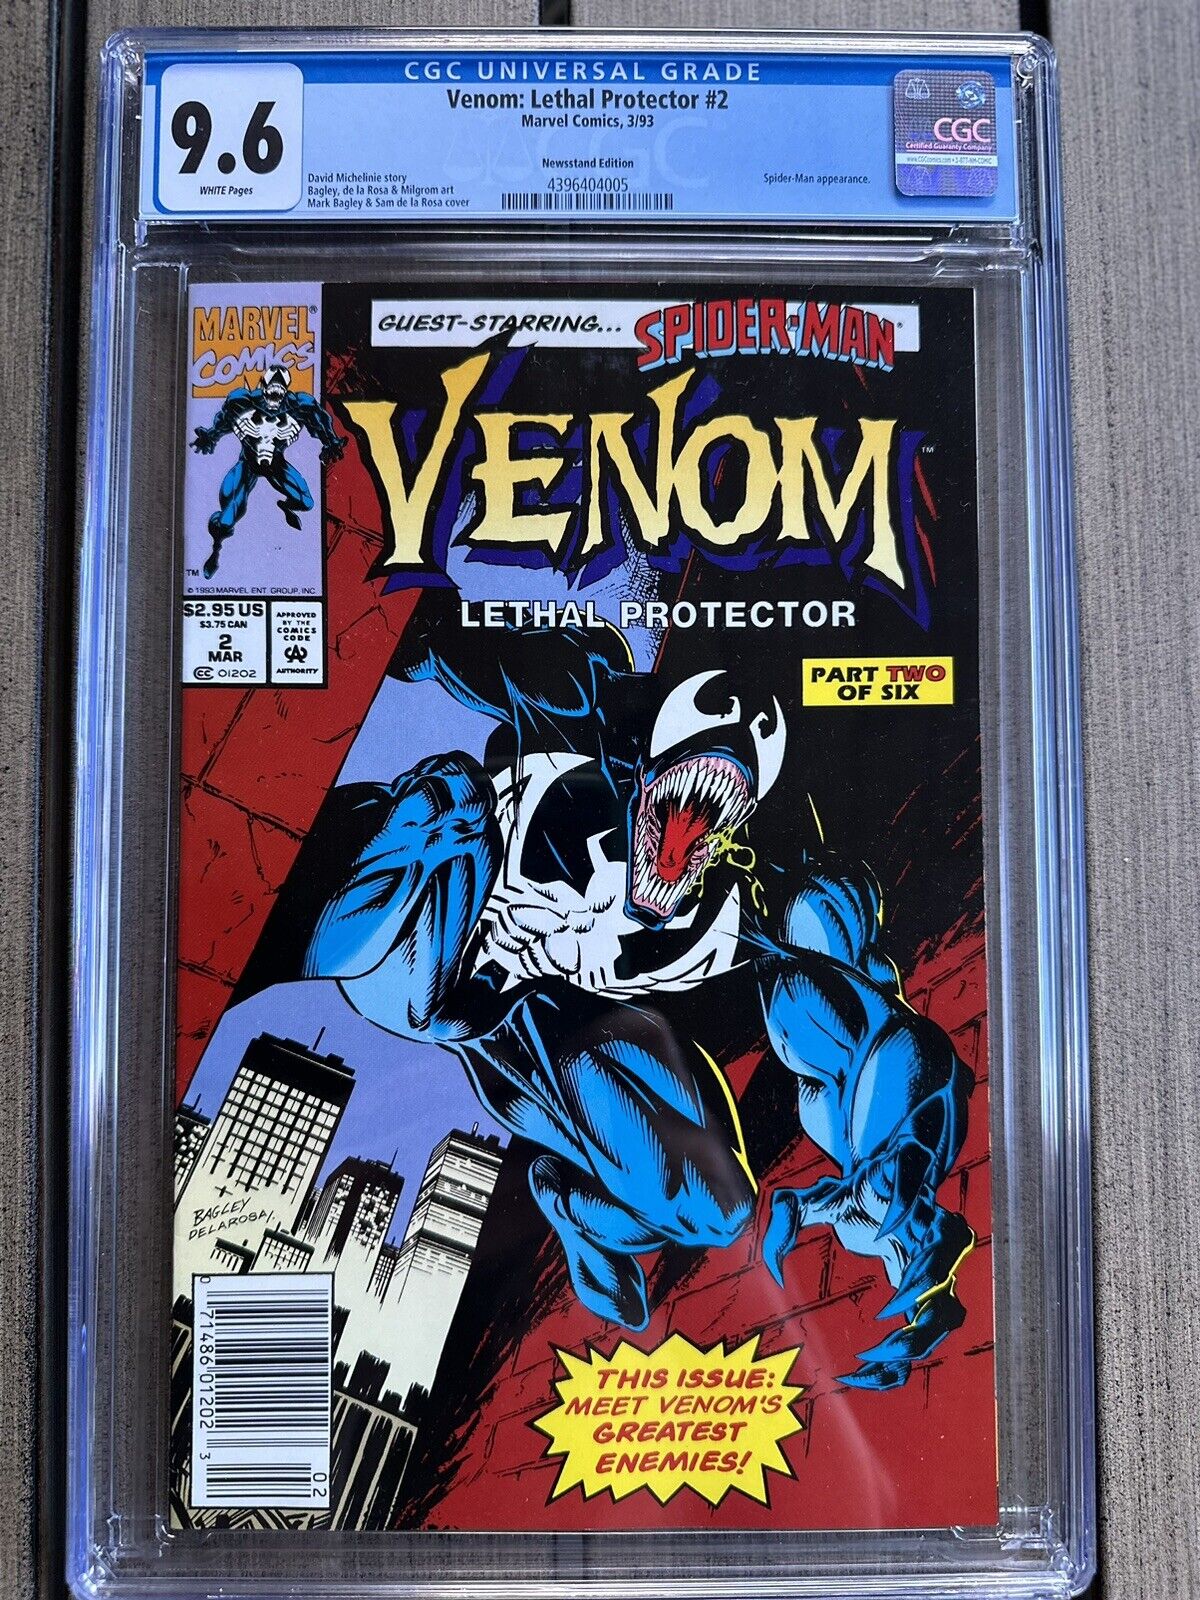 Venom Lethal Protector #2 CGC 9.8 🔥White Pages🔥 Newsstand Edition Marvel 03/93